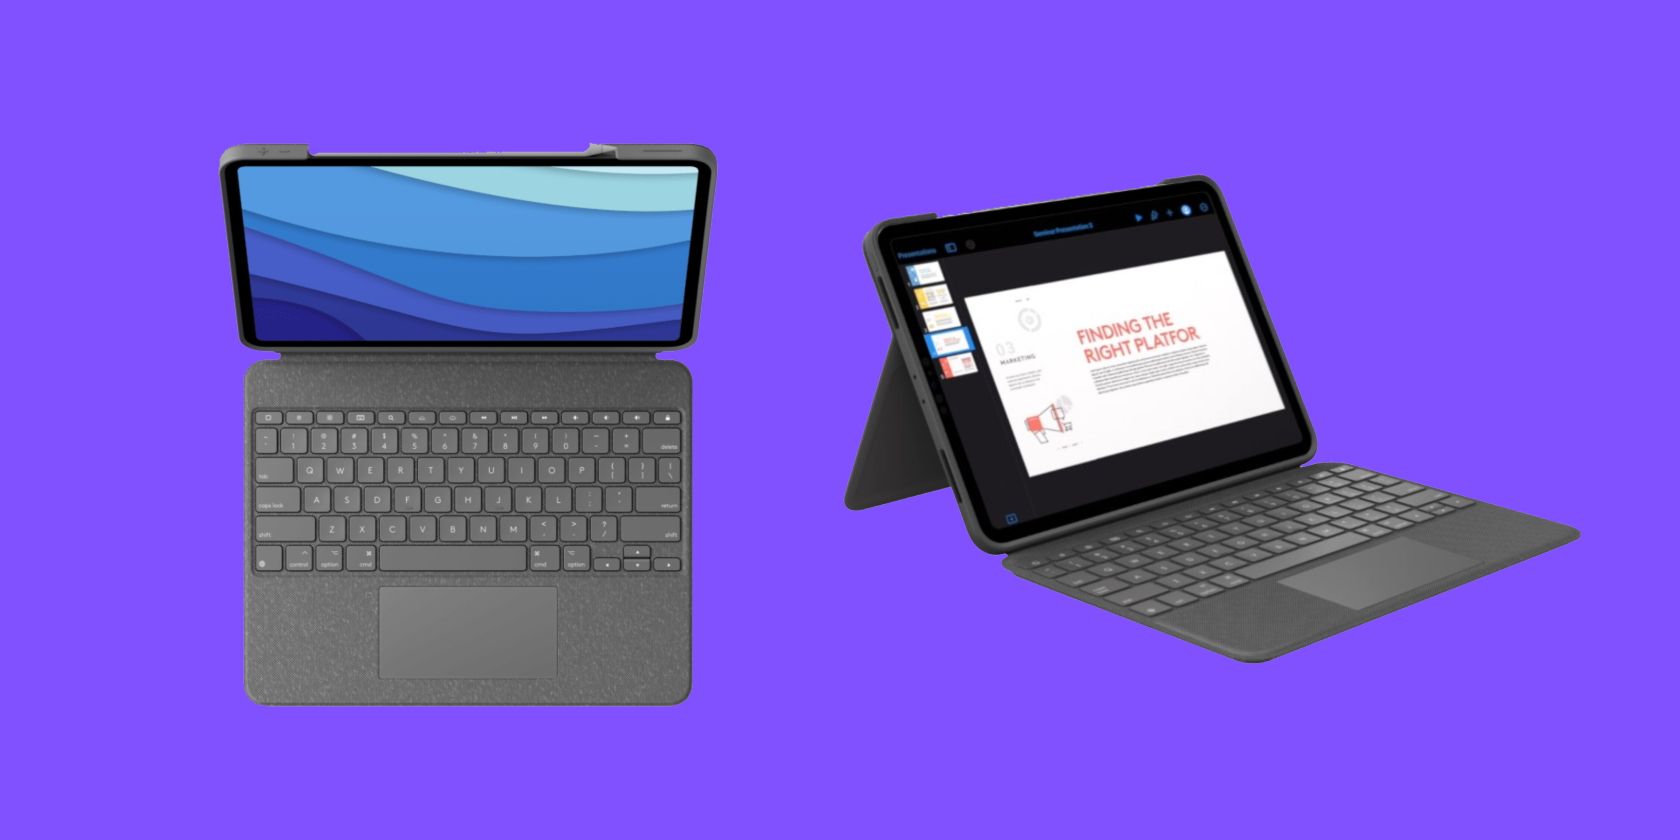 Logitech Combo Touch vs. Logitech Folio Touch: What’s the Difference?